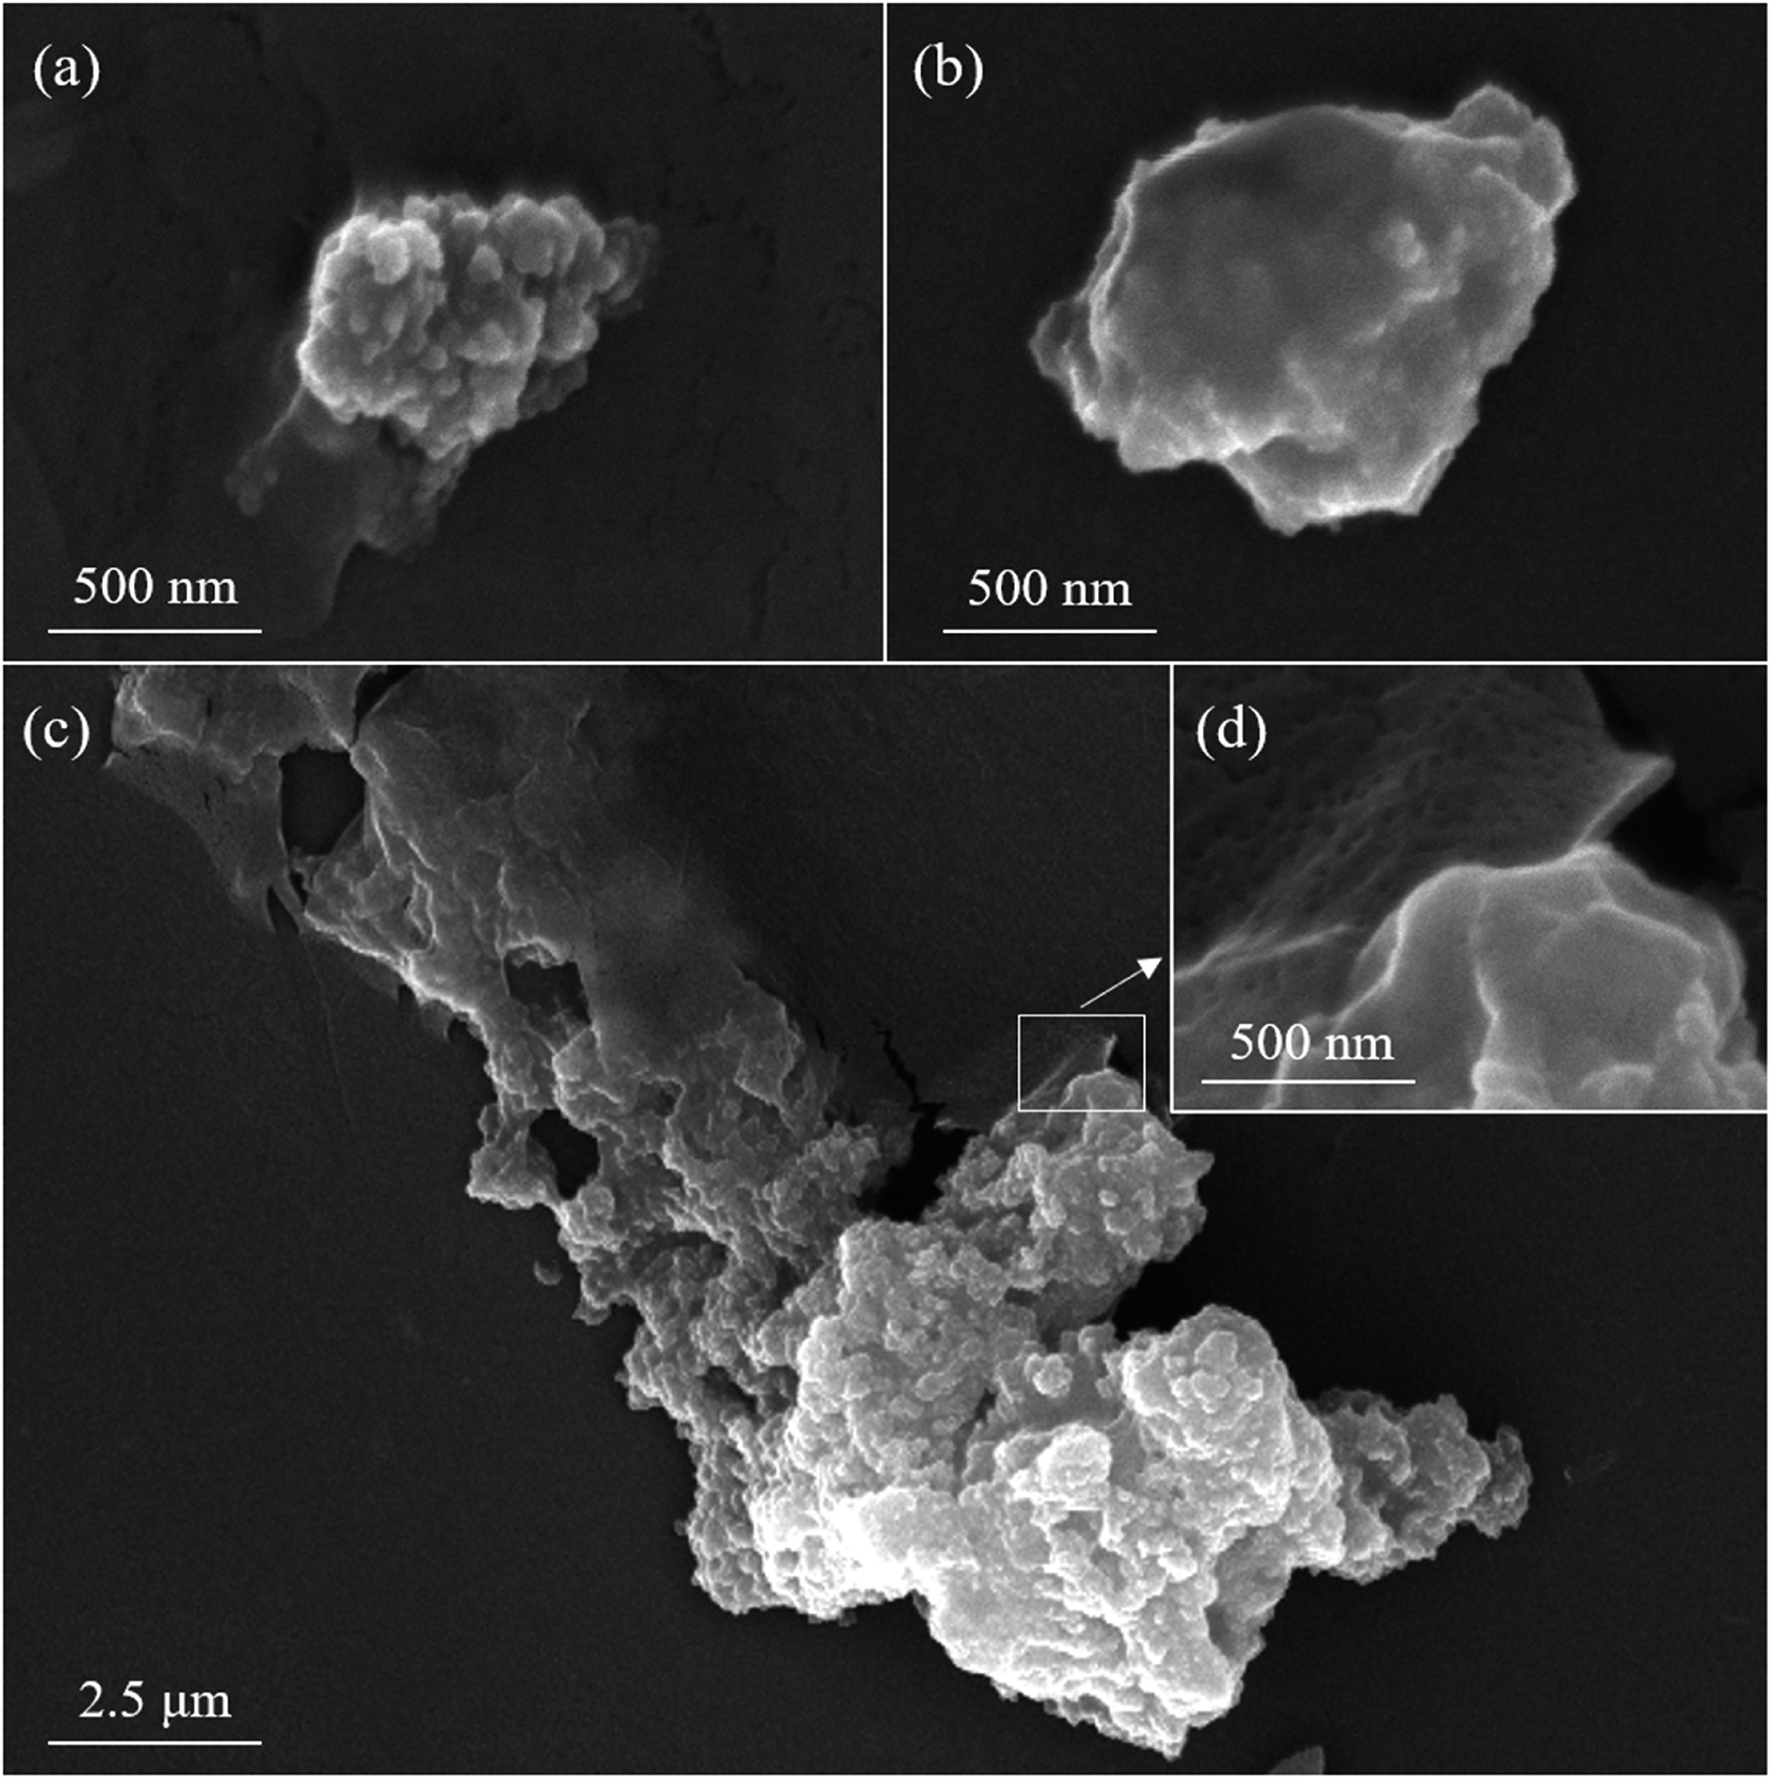 Immobilization Of Laccase On Magnetically Separable Biochar For Highly Efficient Removal Of Bisphenol A In Water Rsc Advances Rsc Publishing Doi 10 1039 C9ra000h